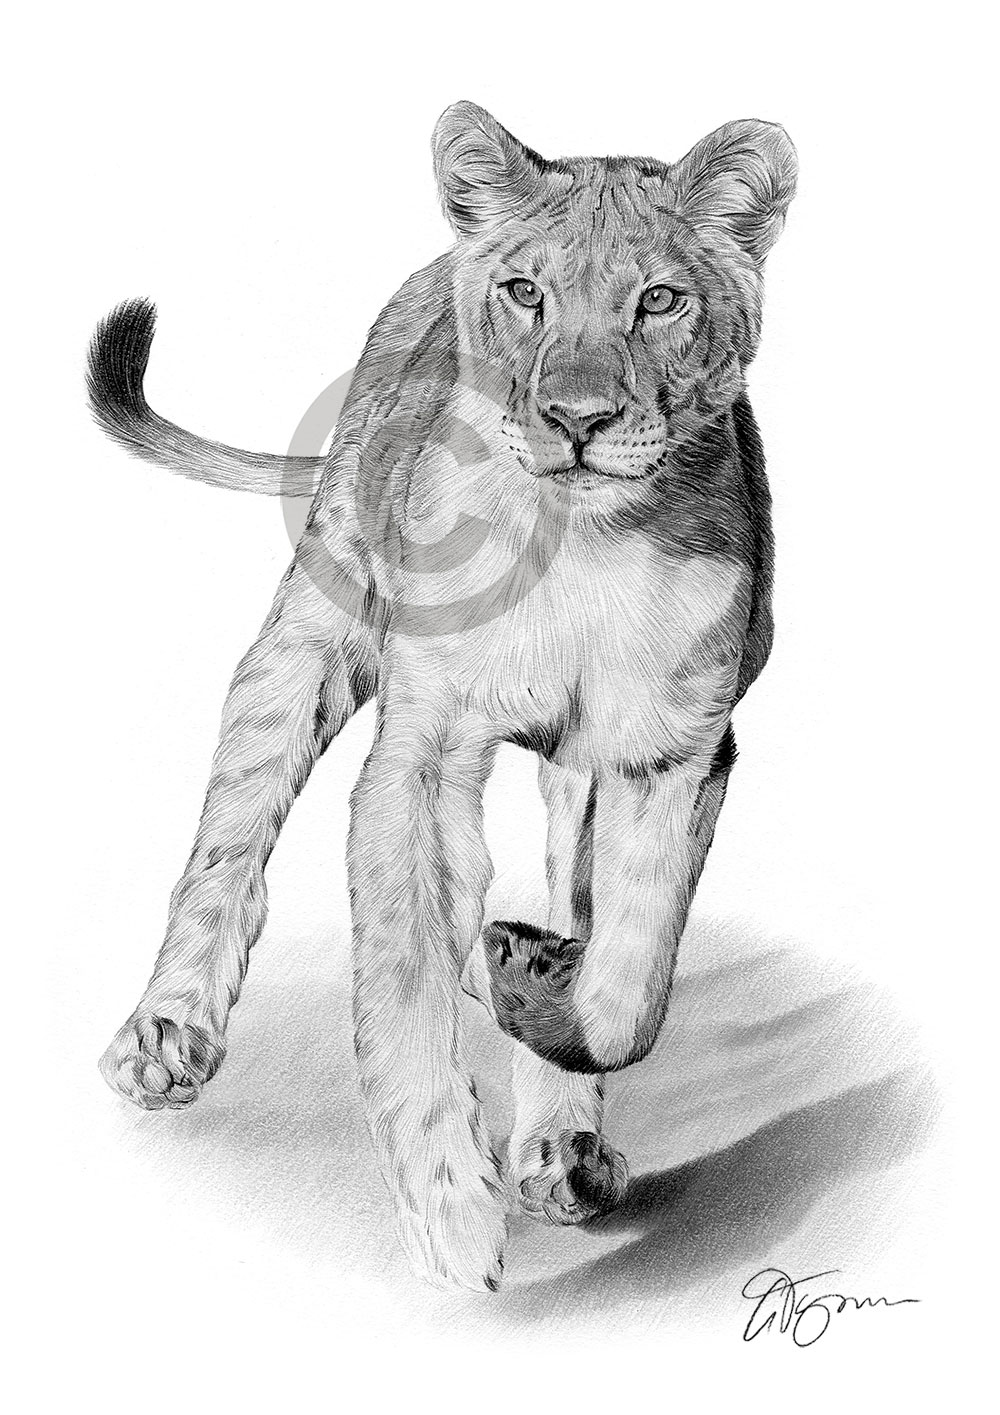 Pencil drawing of a young lion running by artist Gary Tymon